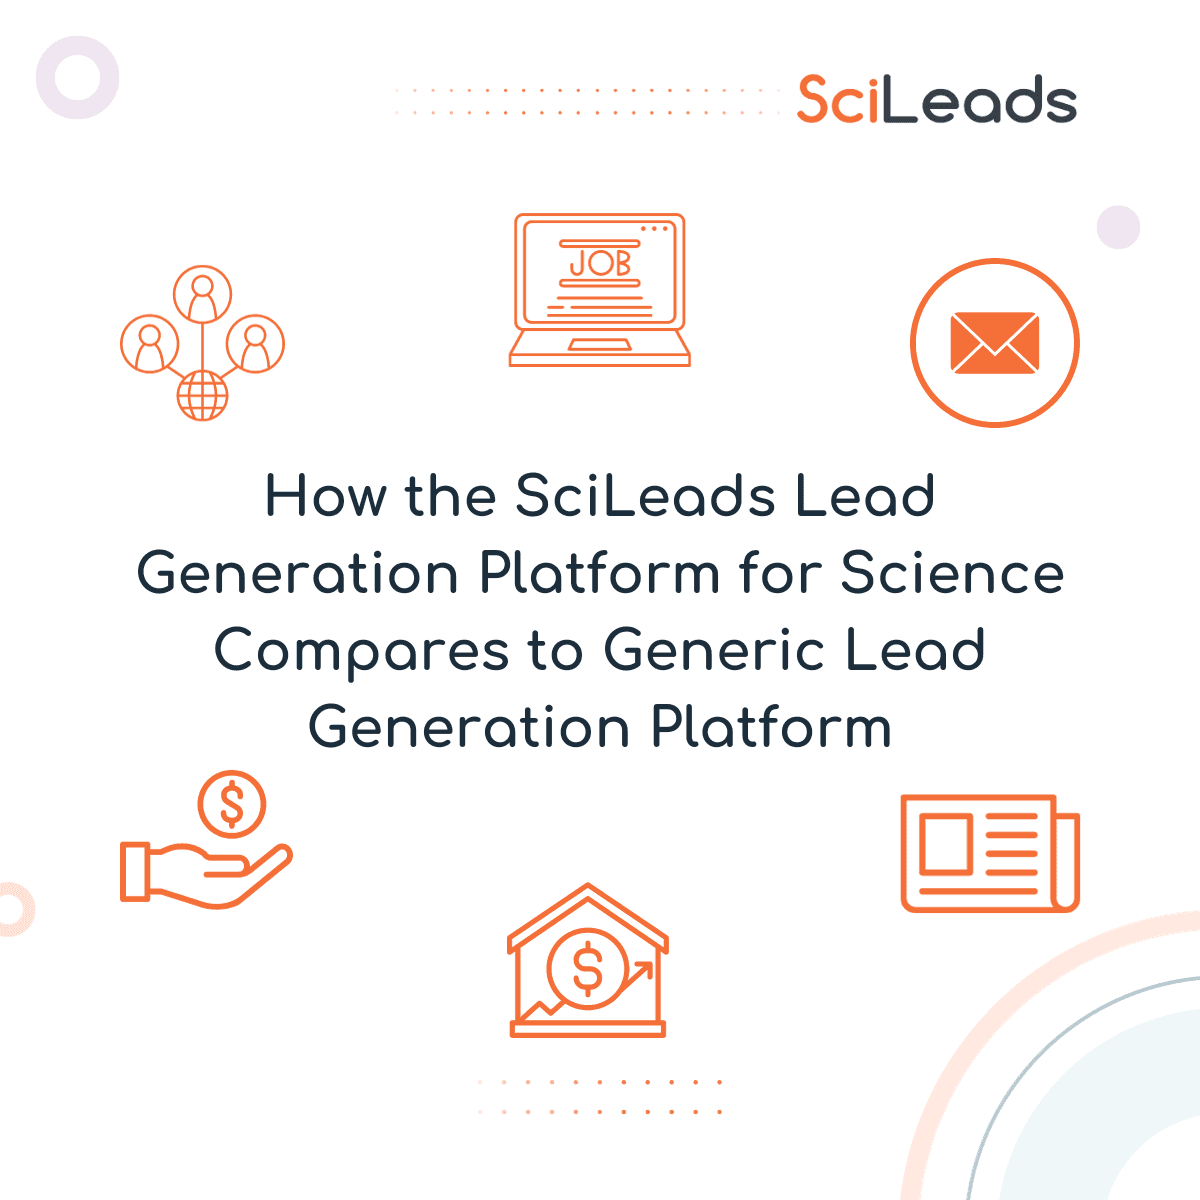 How does SciLeads Compare to Generic Lead Generation?